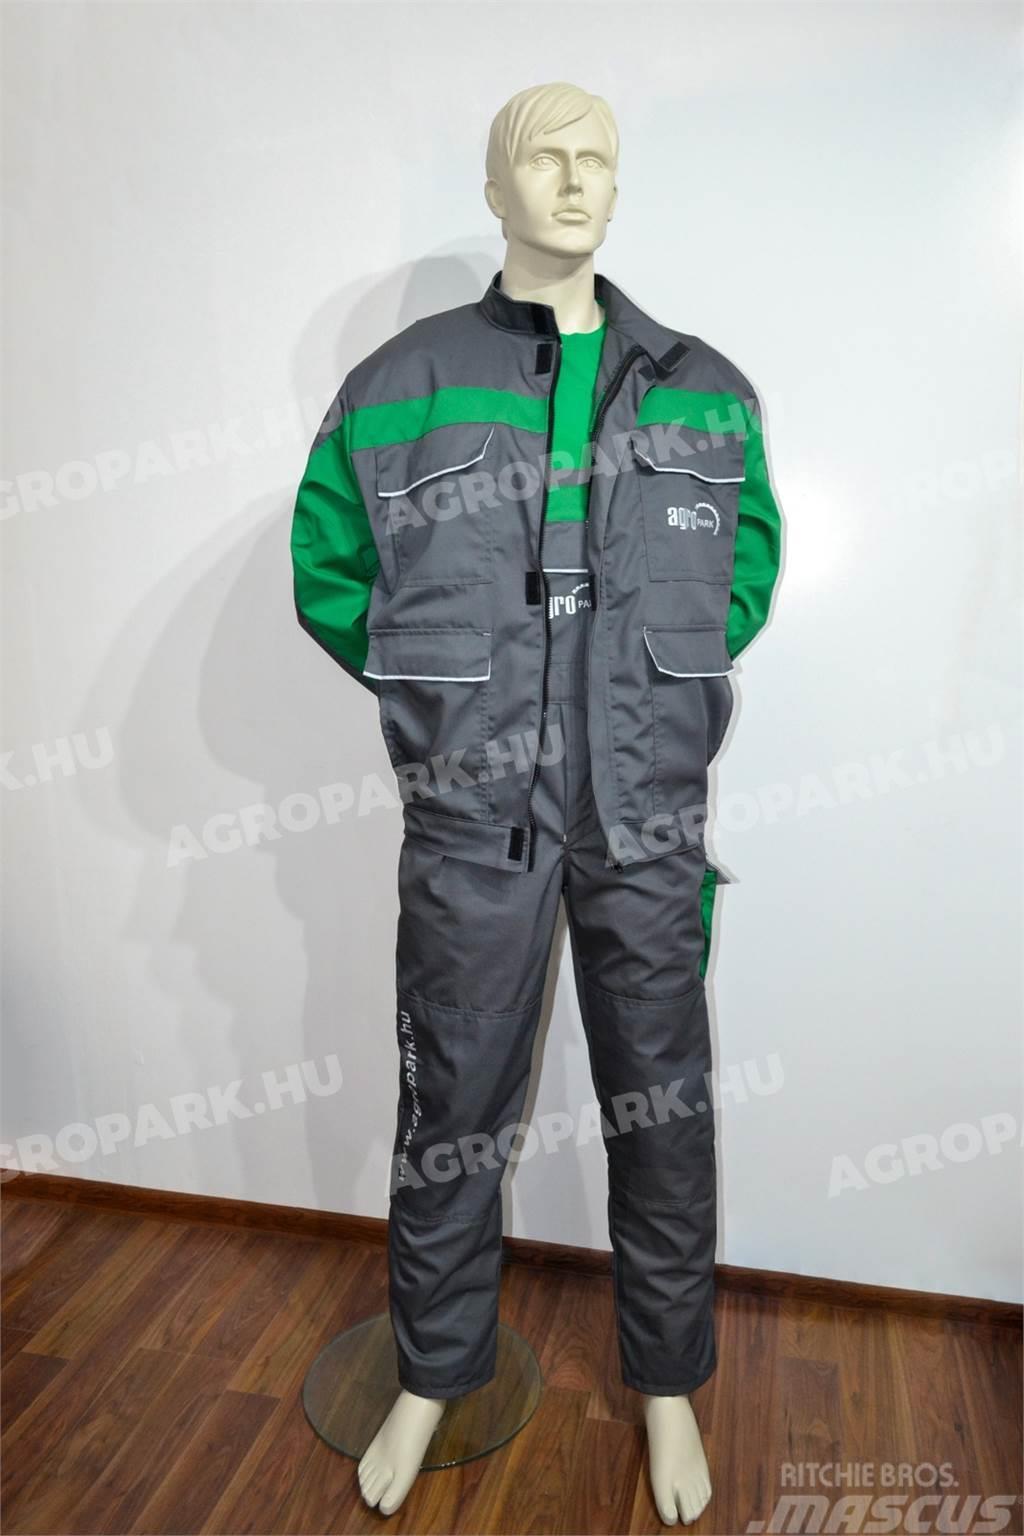  AGROPARK workwear set Other tractor accessories